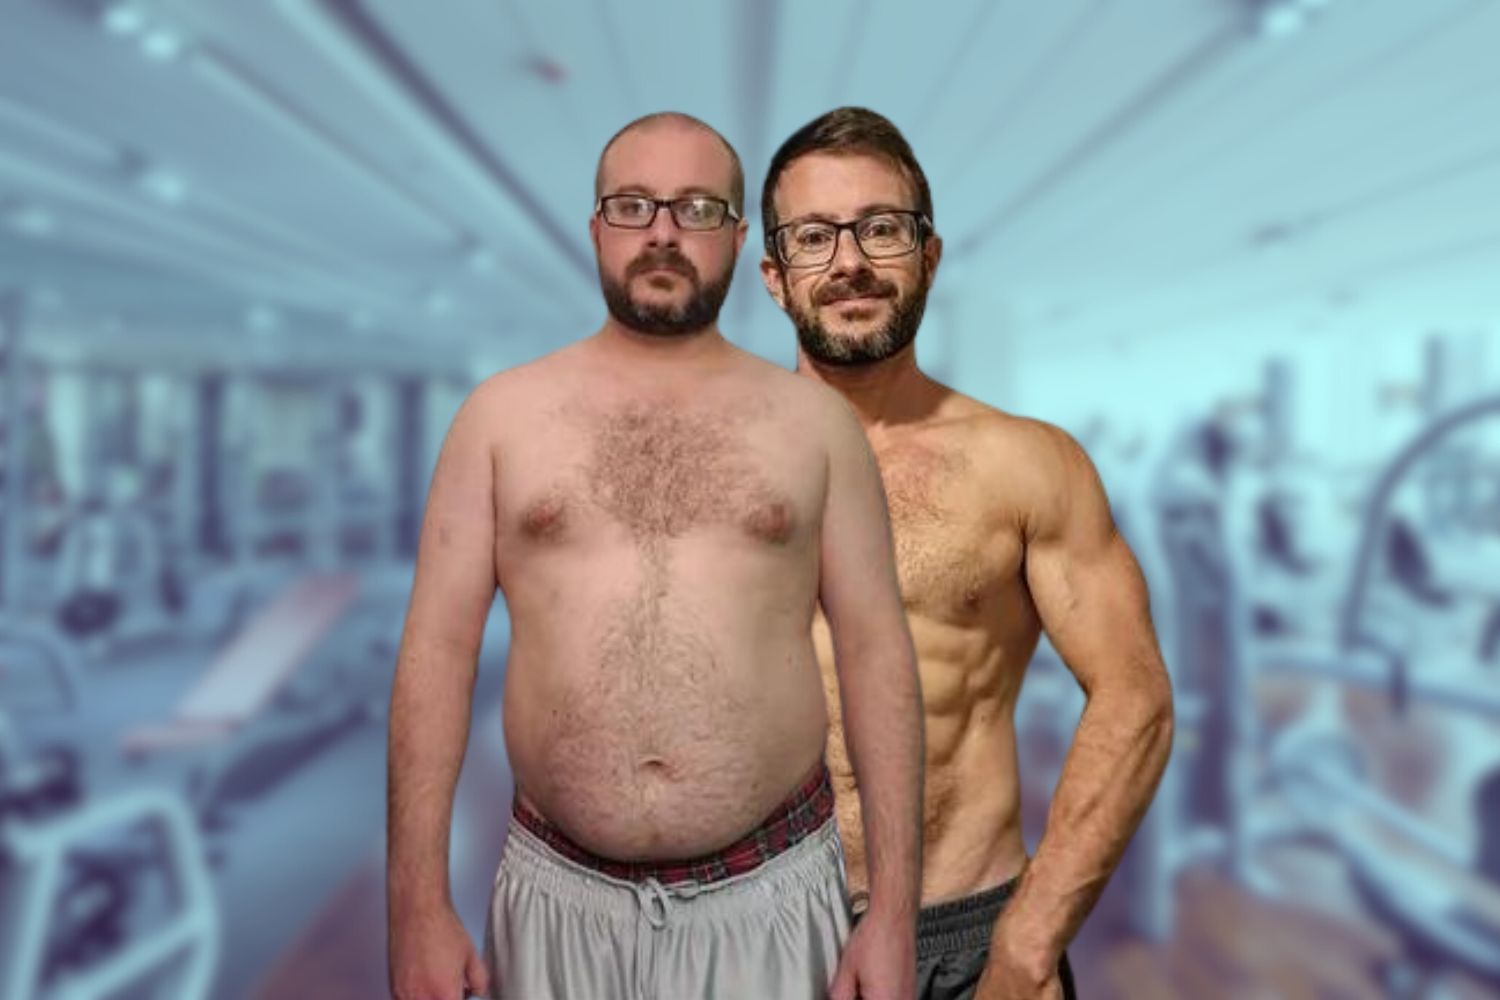 A forty-year-old American is completely torn apart by an unexpected diet hack